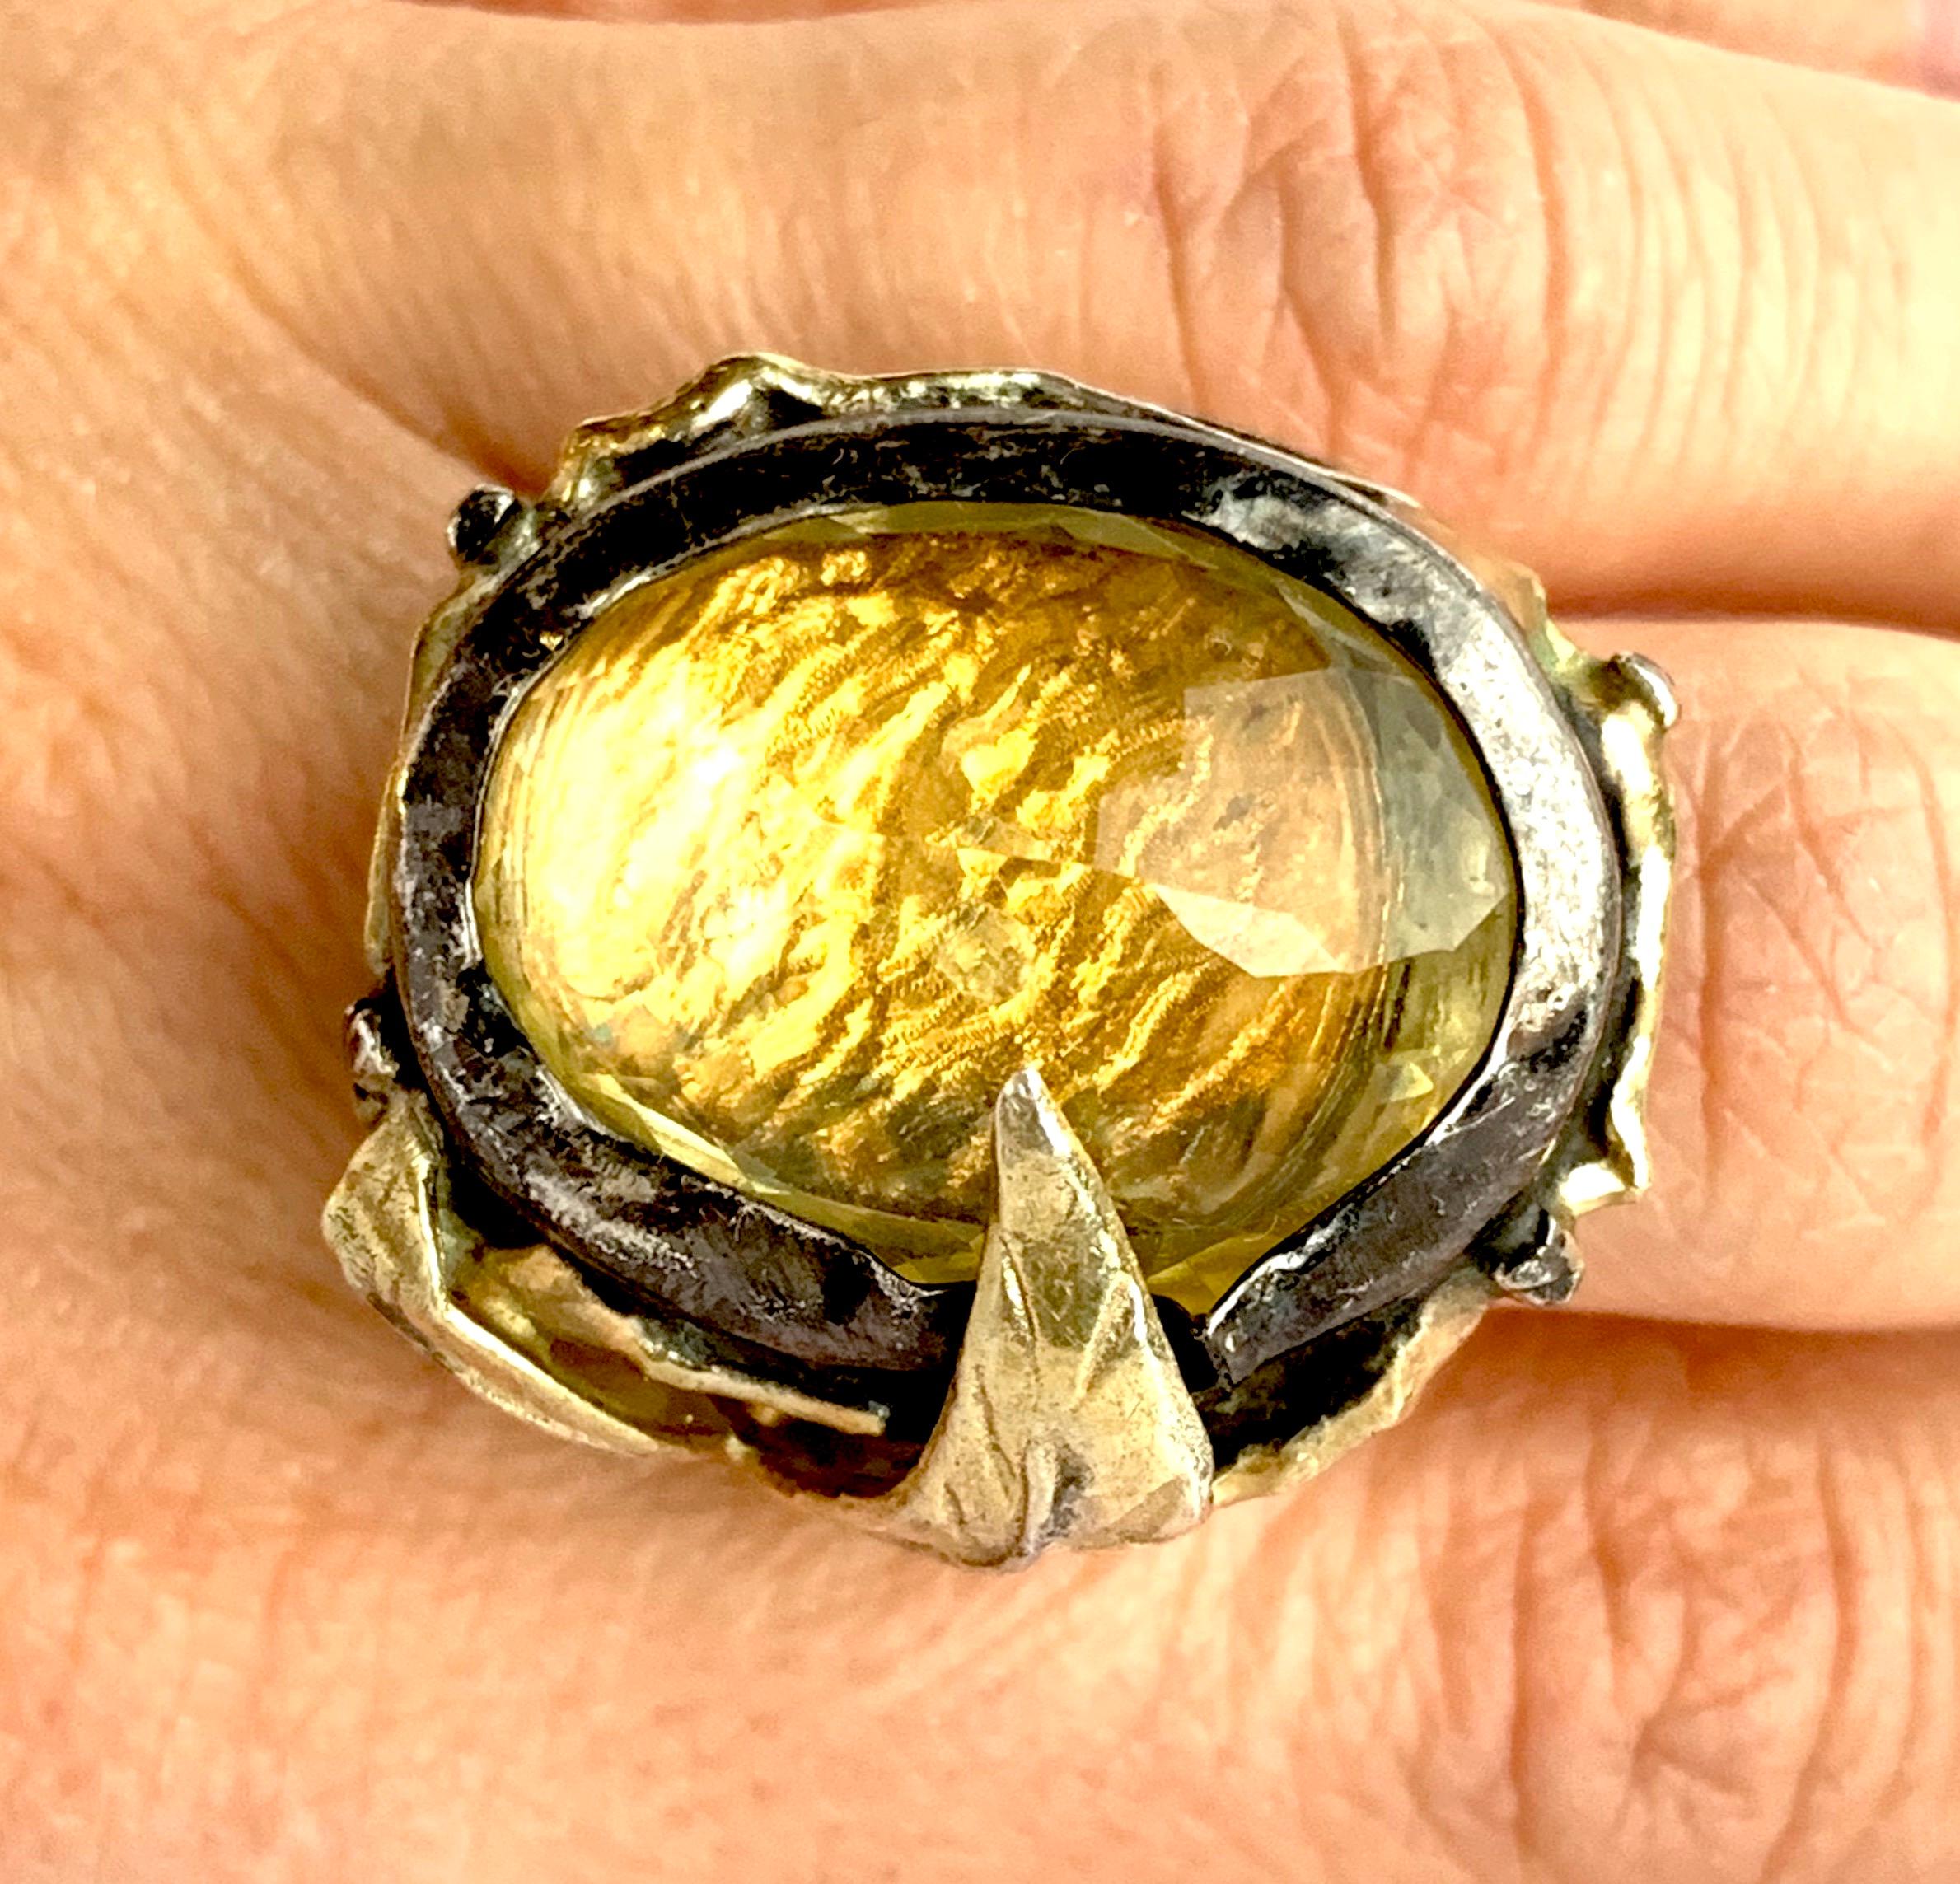 Material: Silver
Center Stone Details: 1 Oval Lemon Quartz - Measuring 17 x 22 mm
Size: 5.75. Alberto offers complimentary sizing on all rings.

Fine one-of-a kind craftsmanship meets incredible quality in this breathtaking piece of jewelry.
